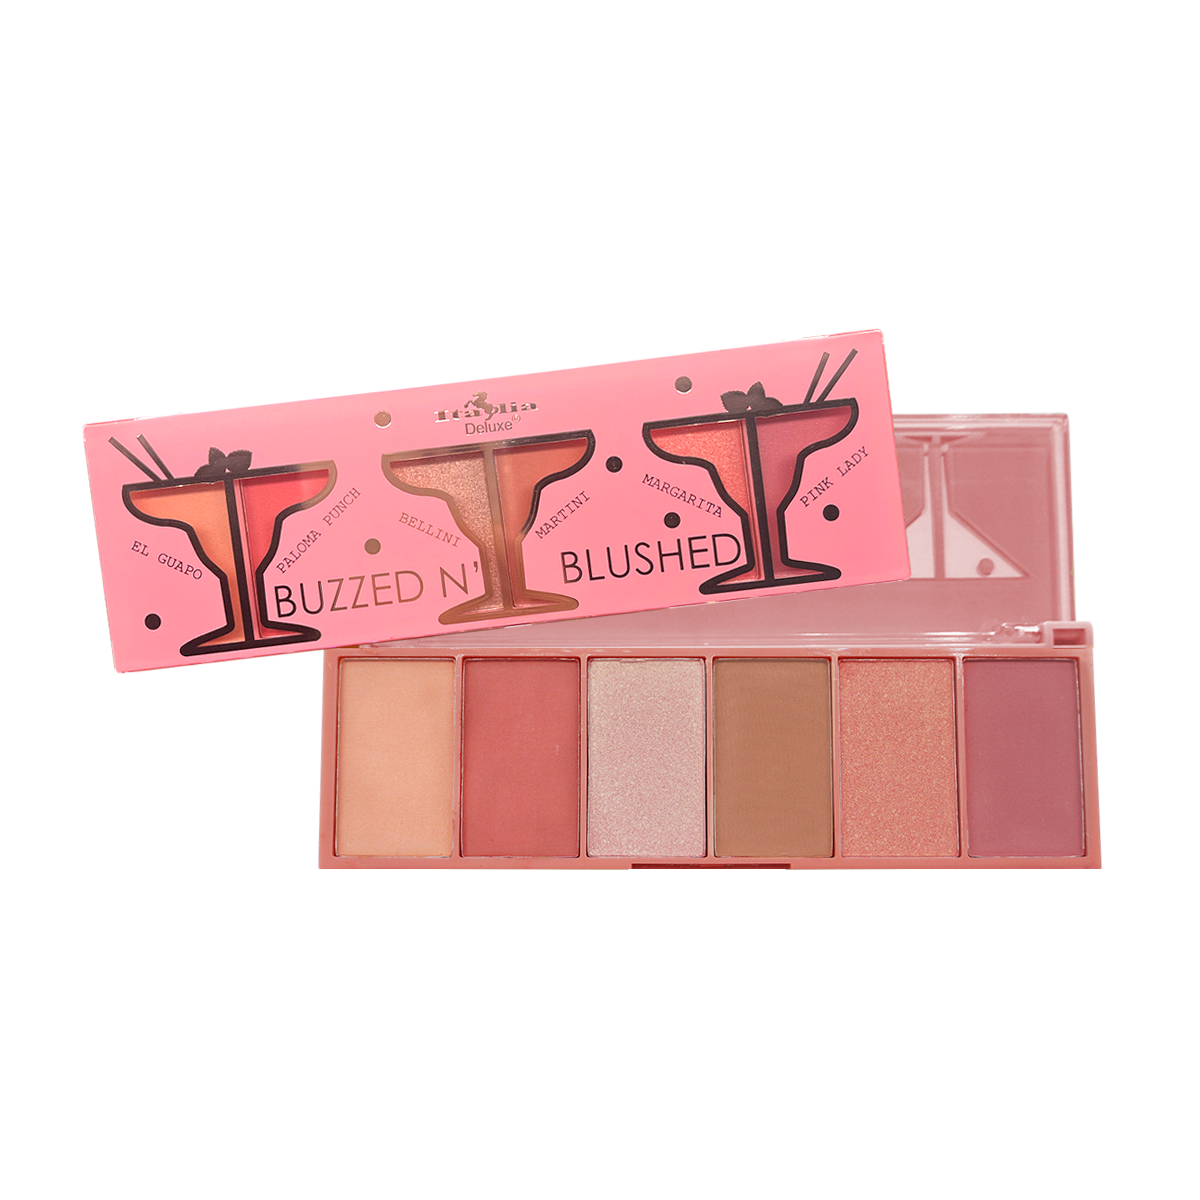 Italia Deluxe - Buzzed N' Blushed Blush & Highlighter Palette